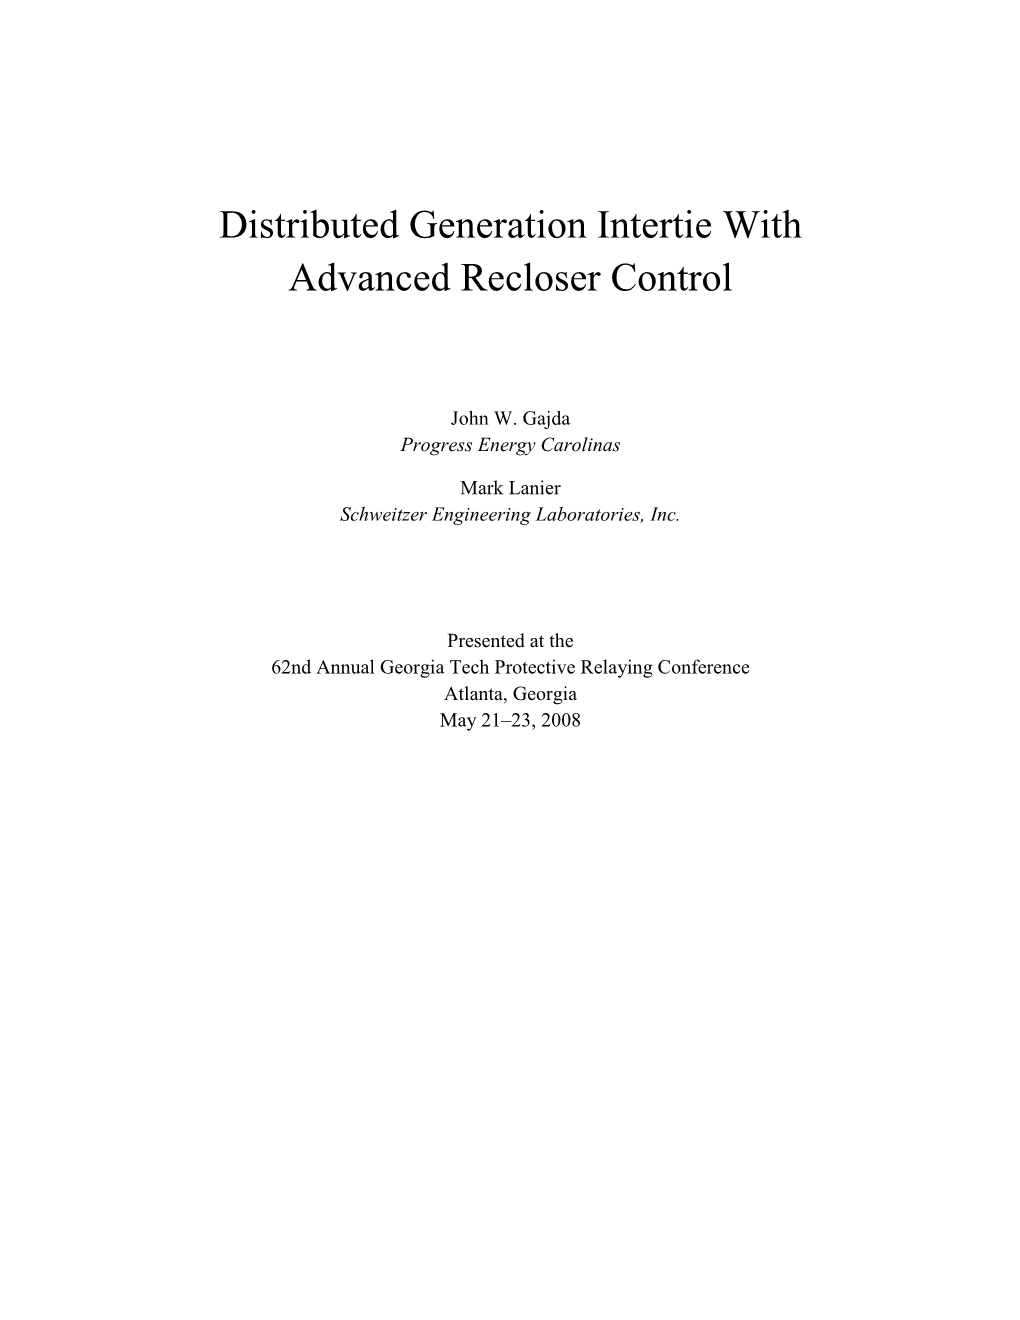 Distributed Generation Intertie with Advanced Recloser Control